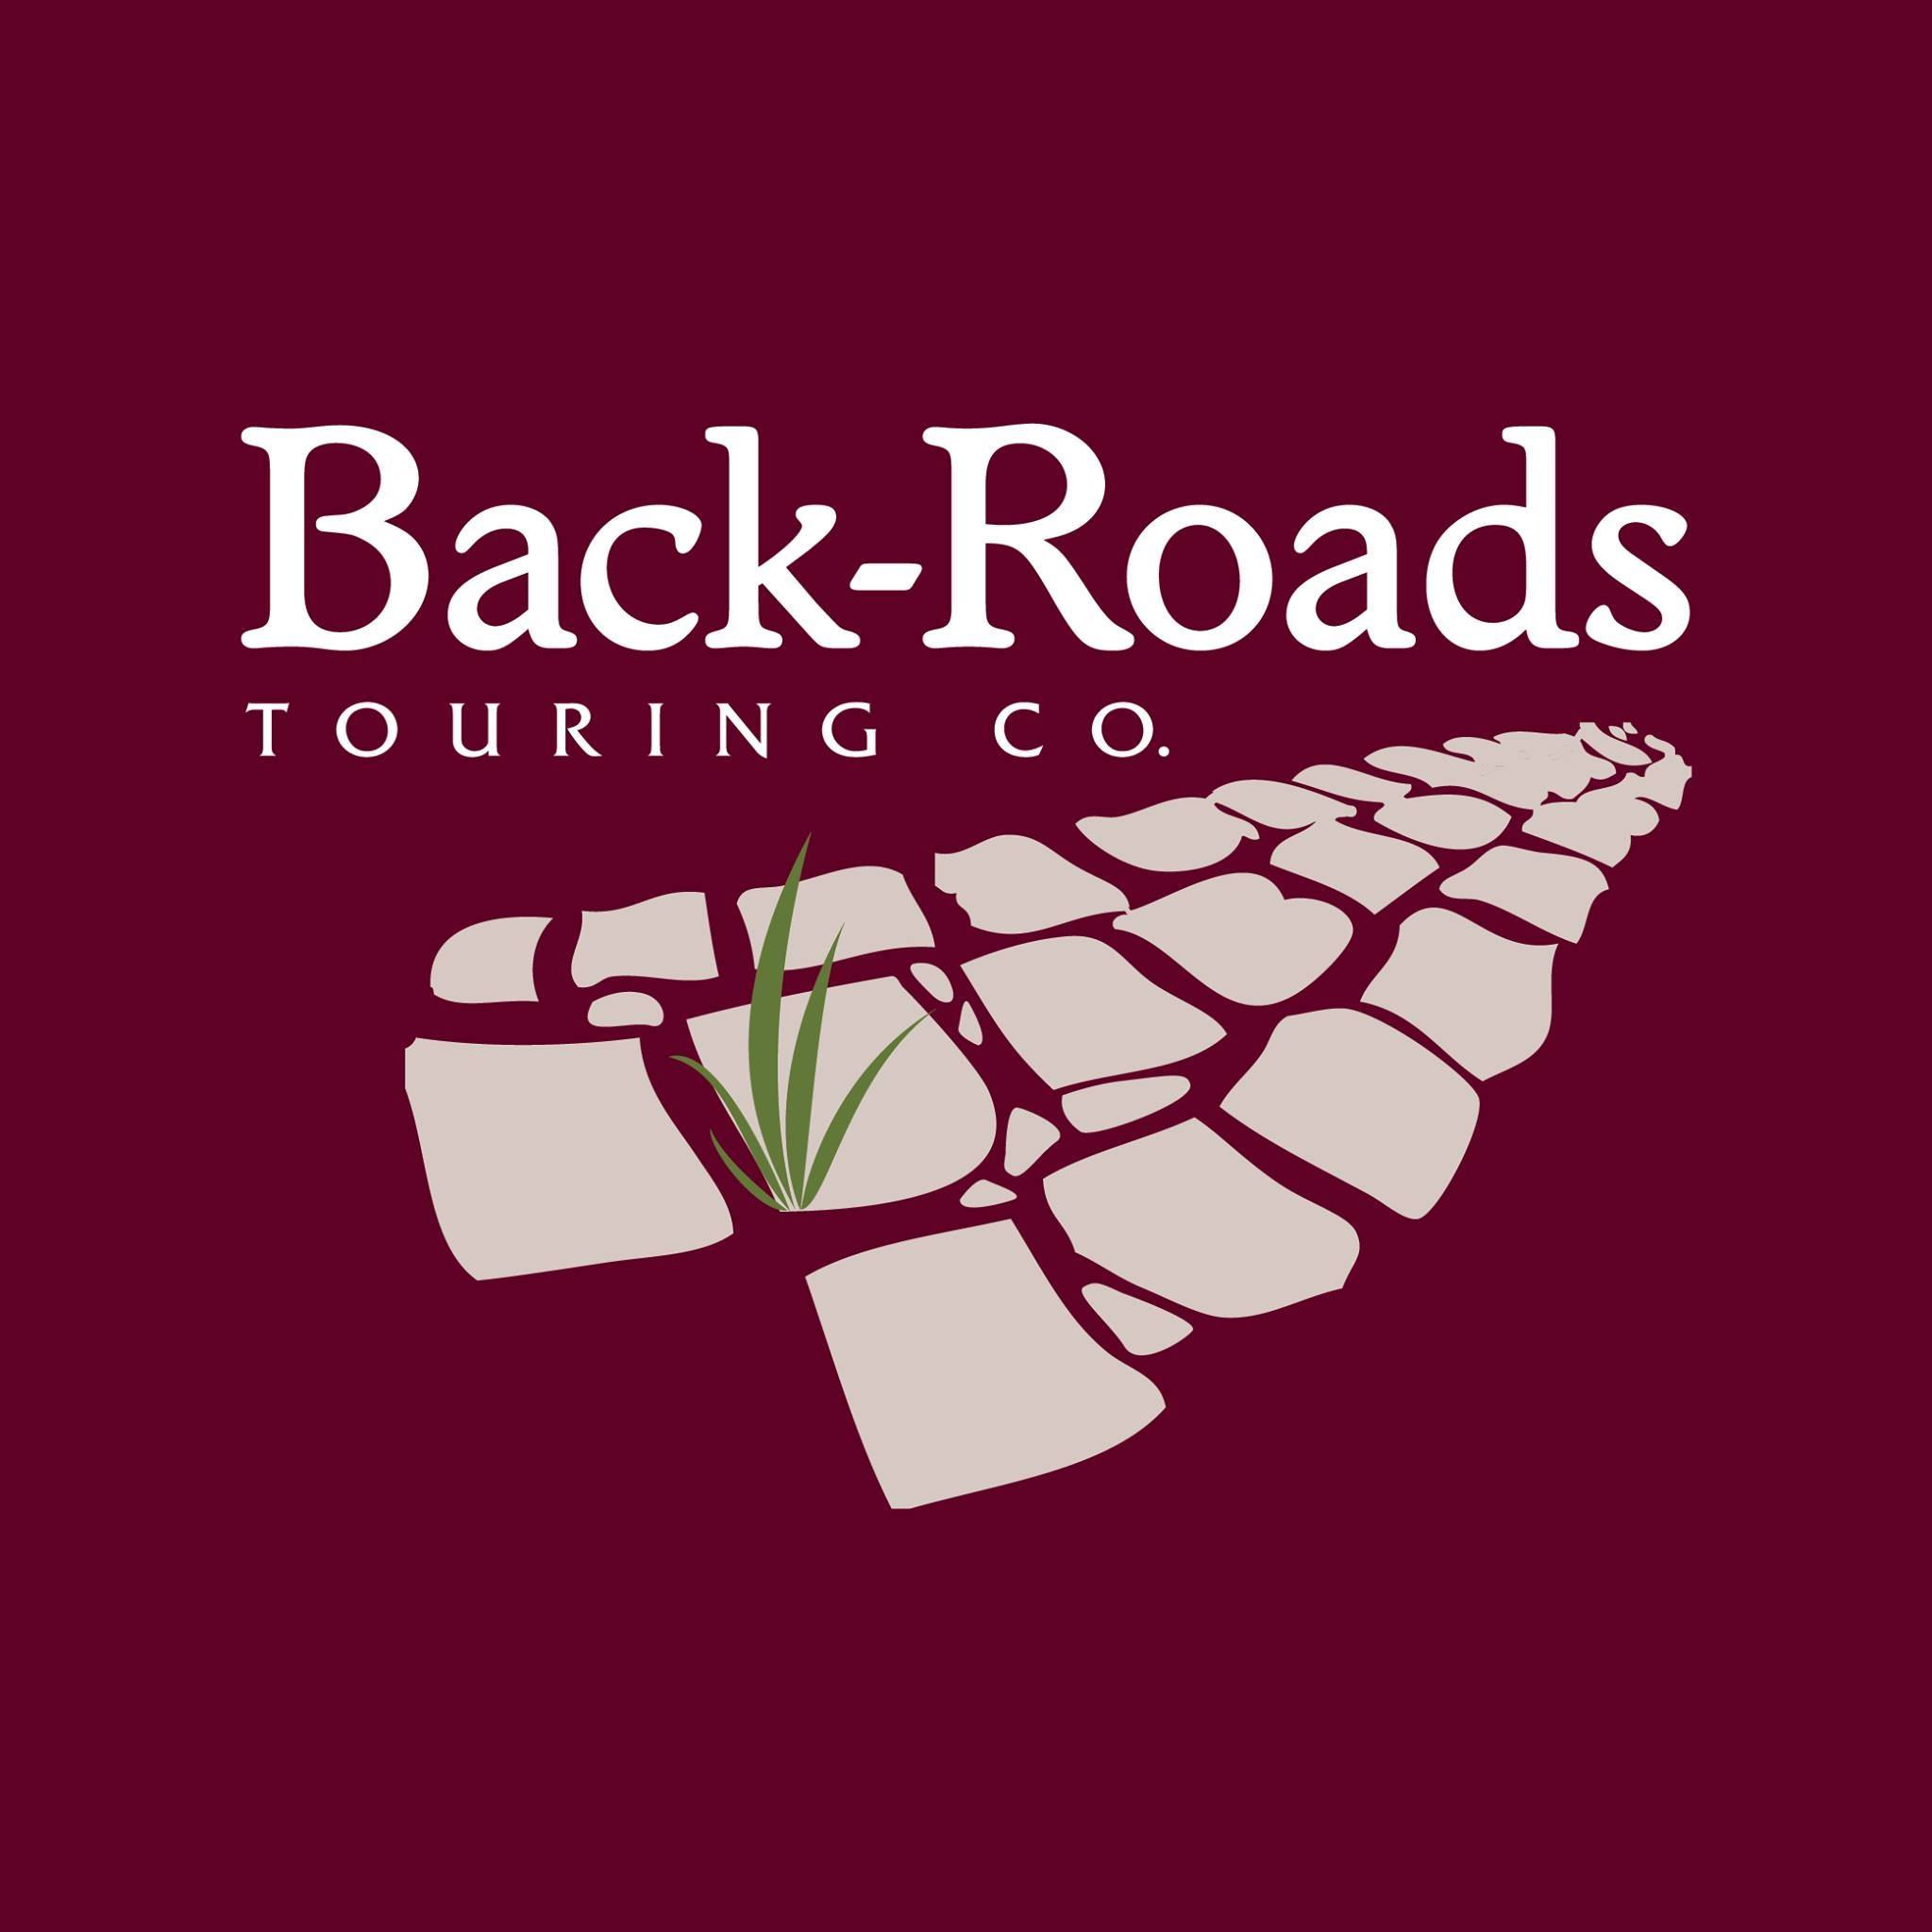 Back-Roads Touring Co